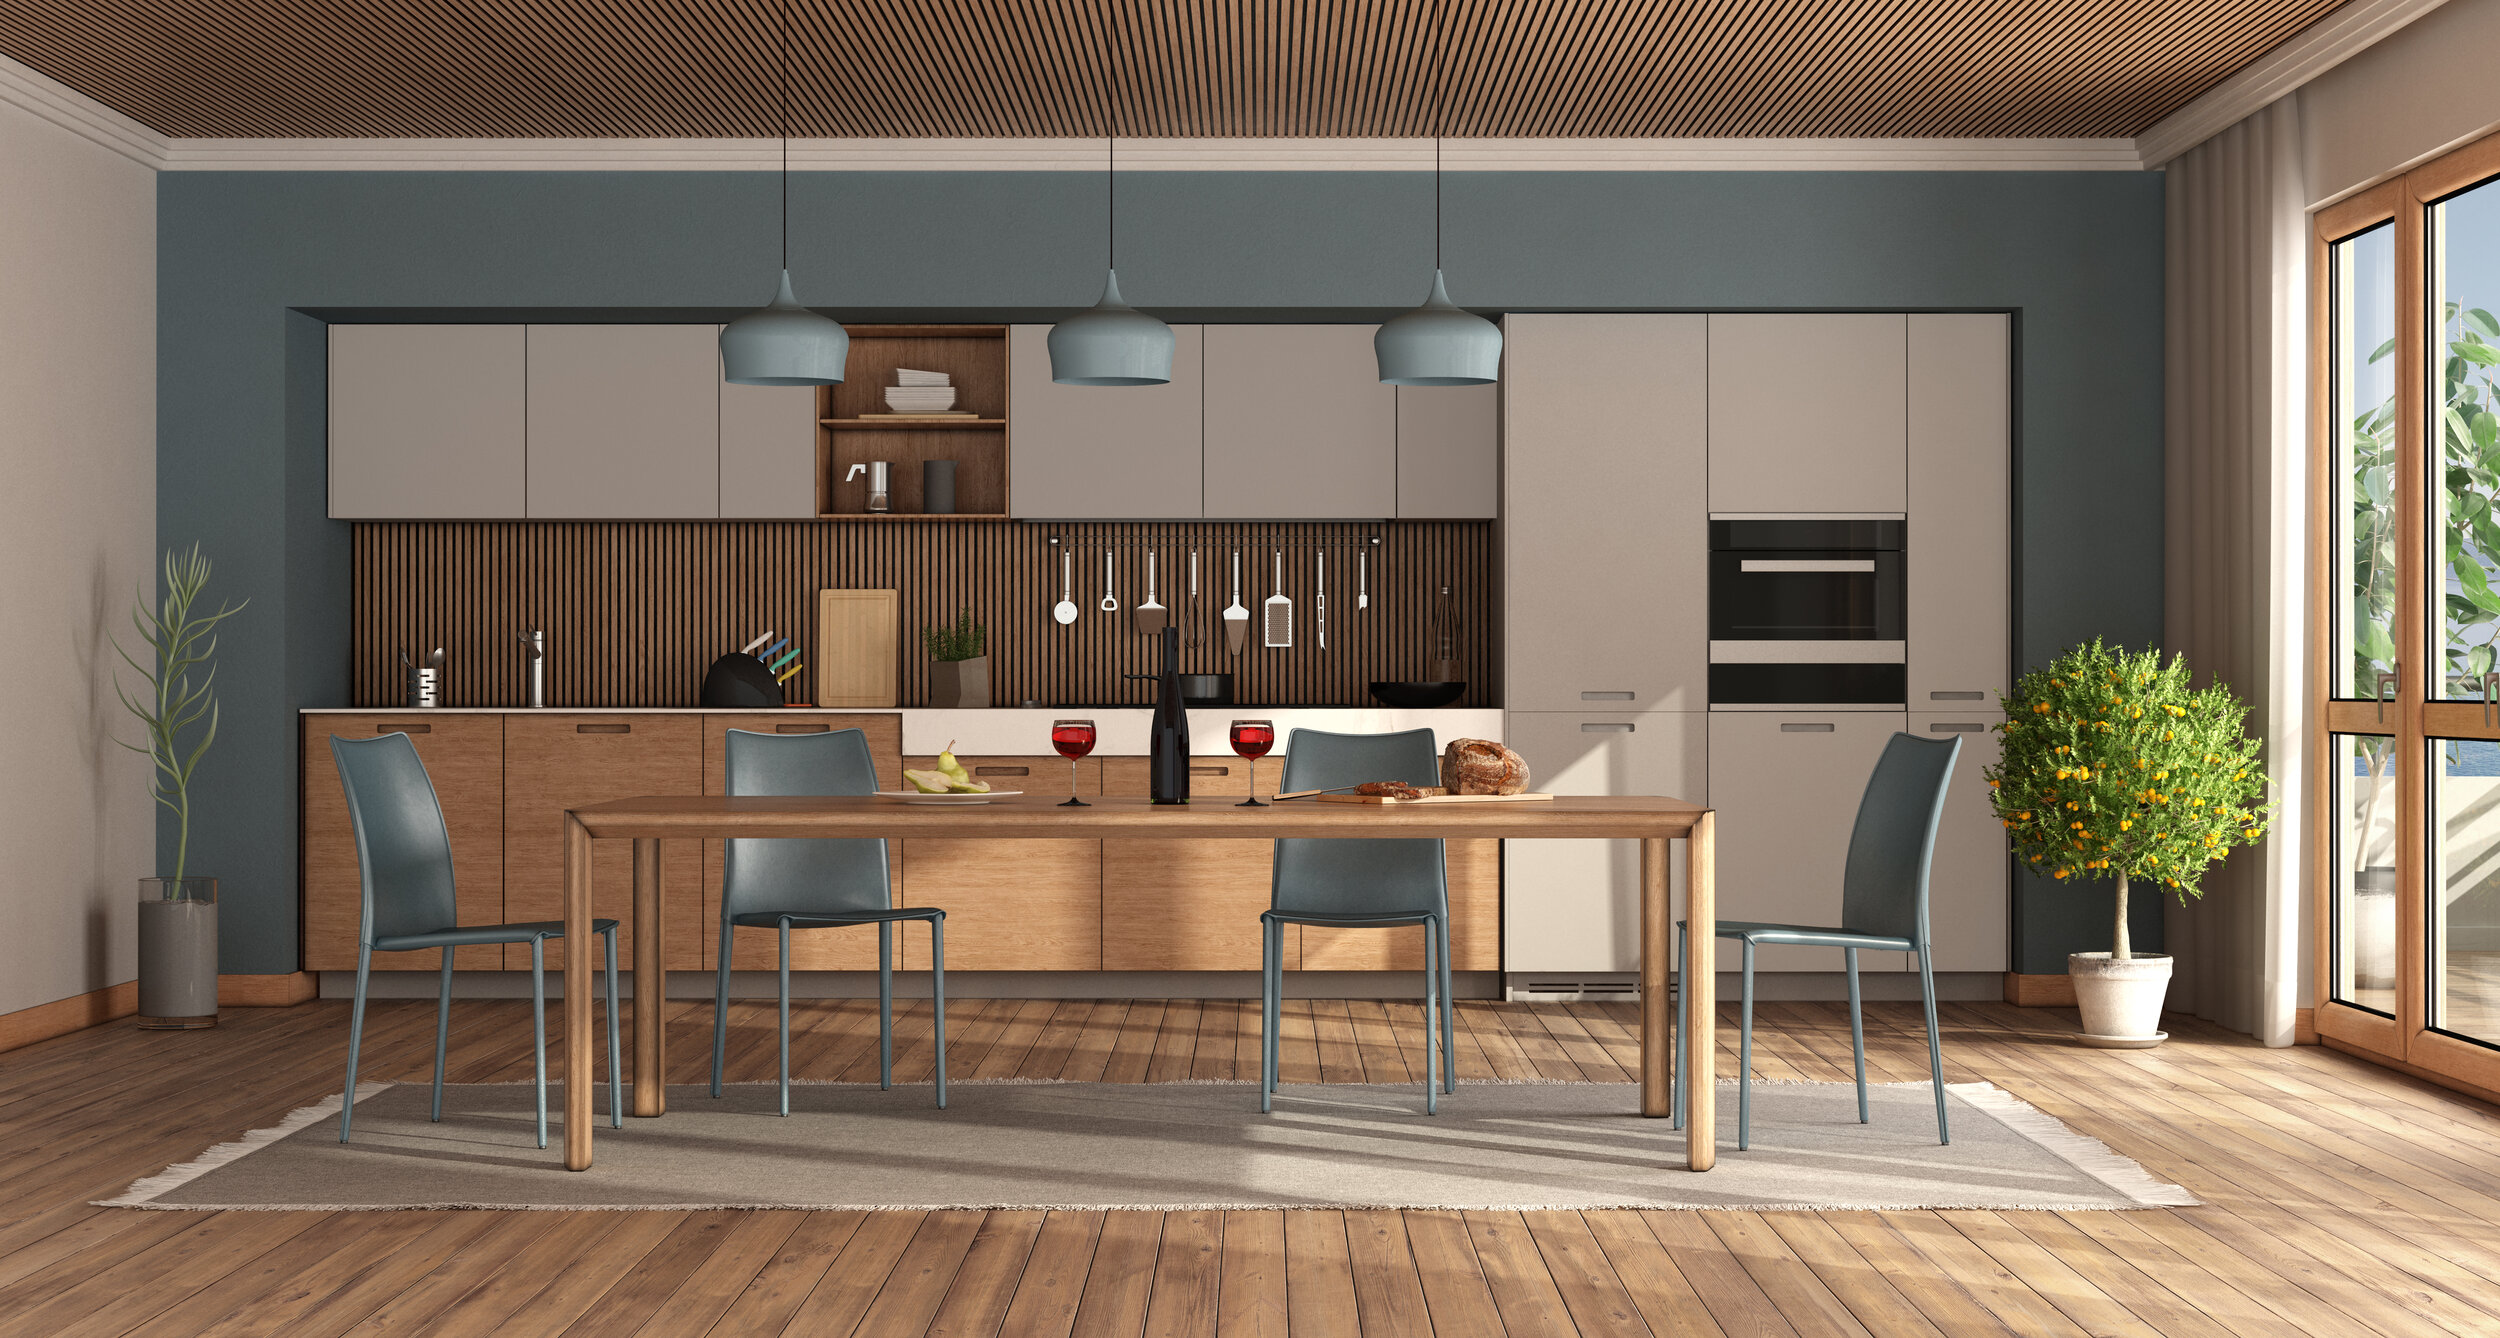 modern-kitchen-with-wooden-table-and-blue-chairs-427U8MG.jpg